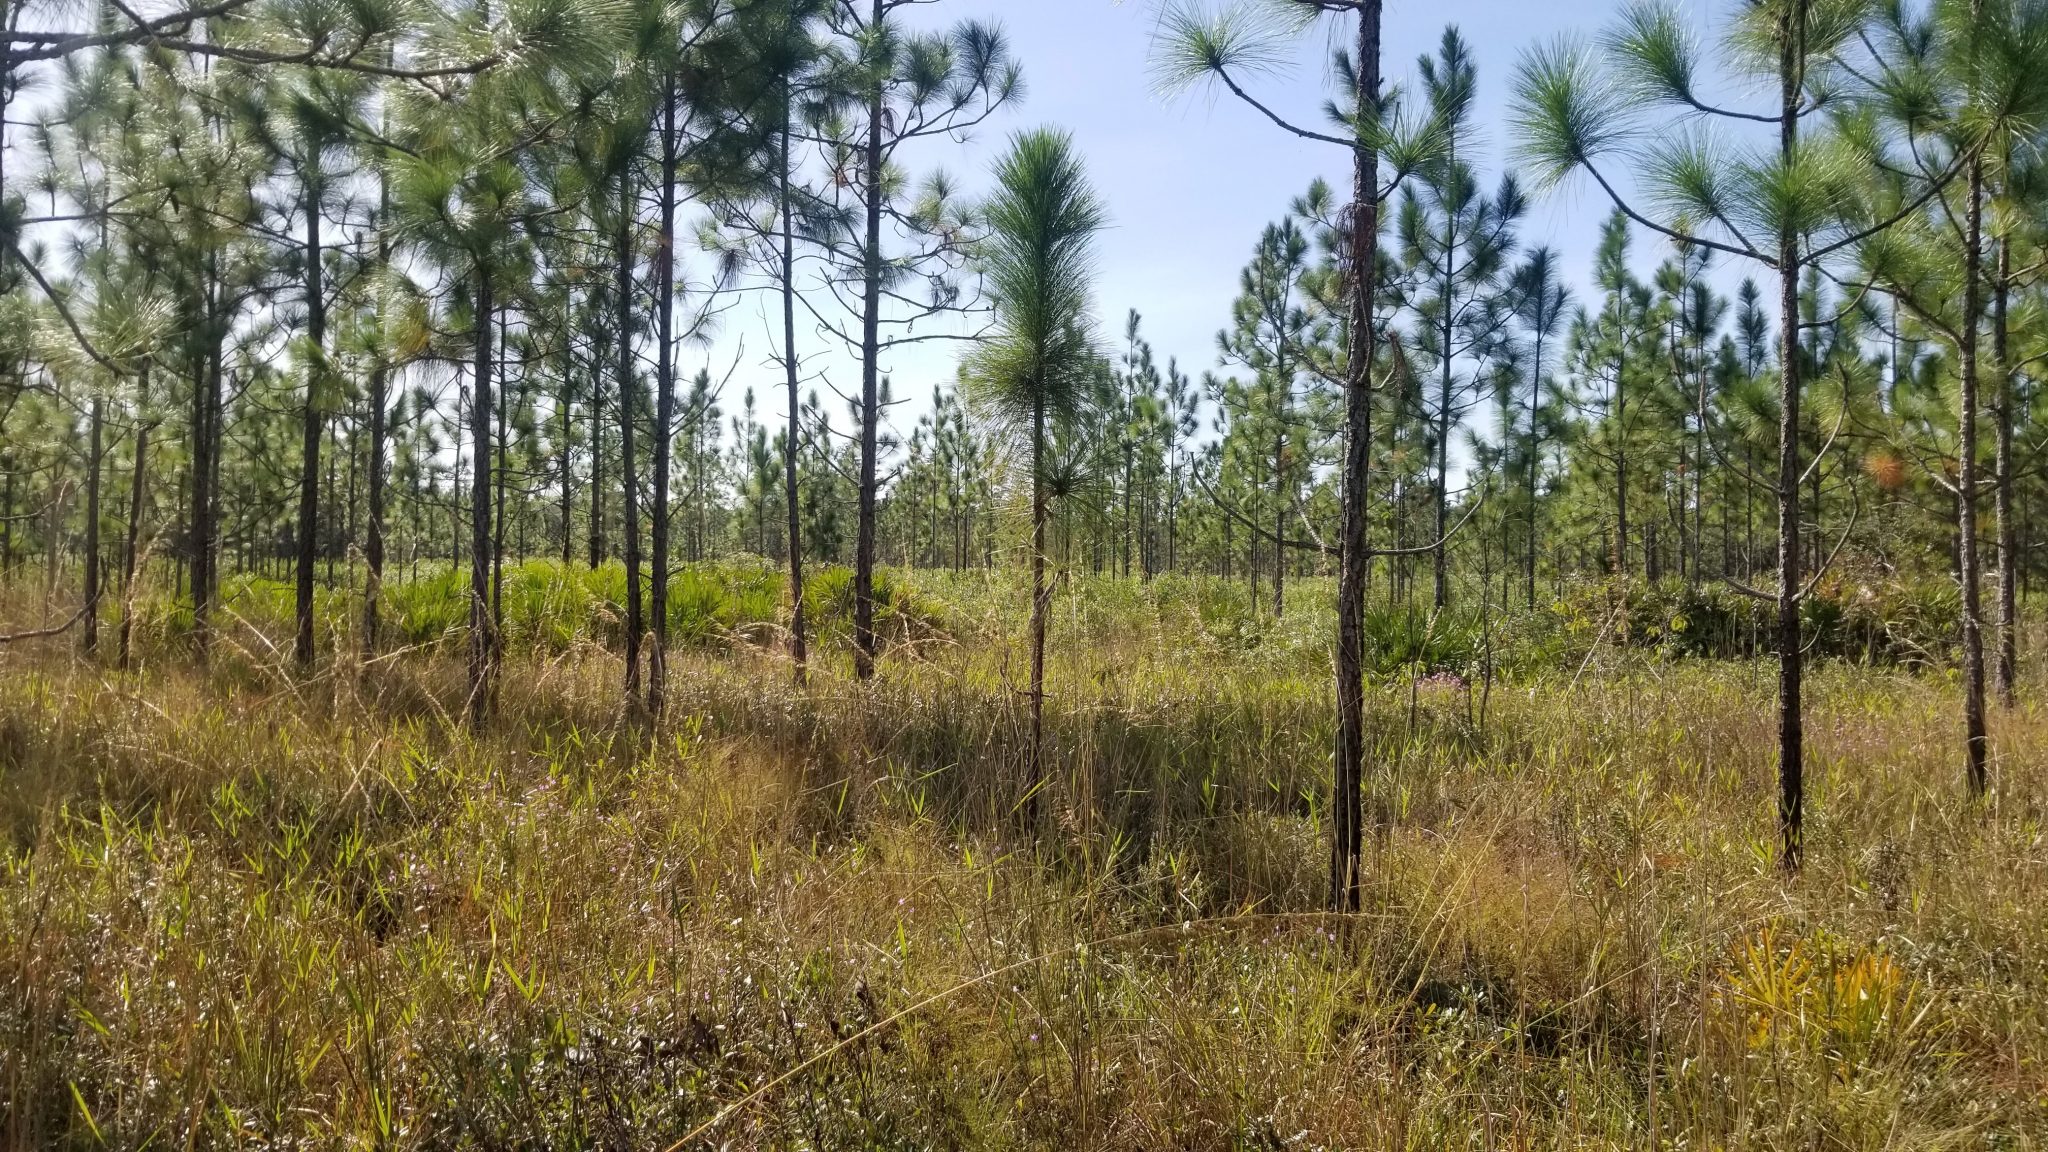 A restored stand of longleaf pine trees